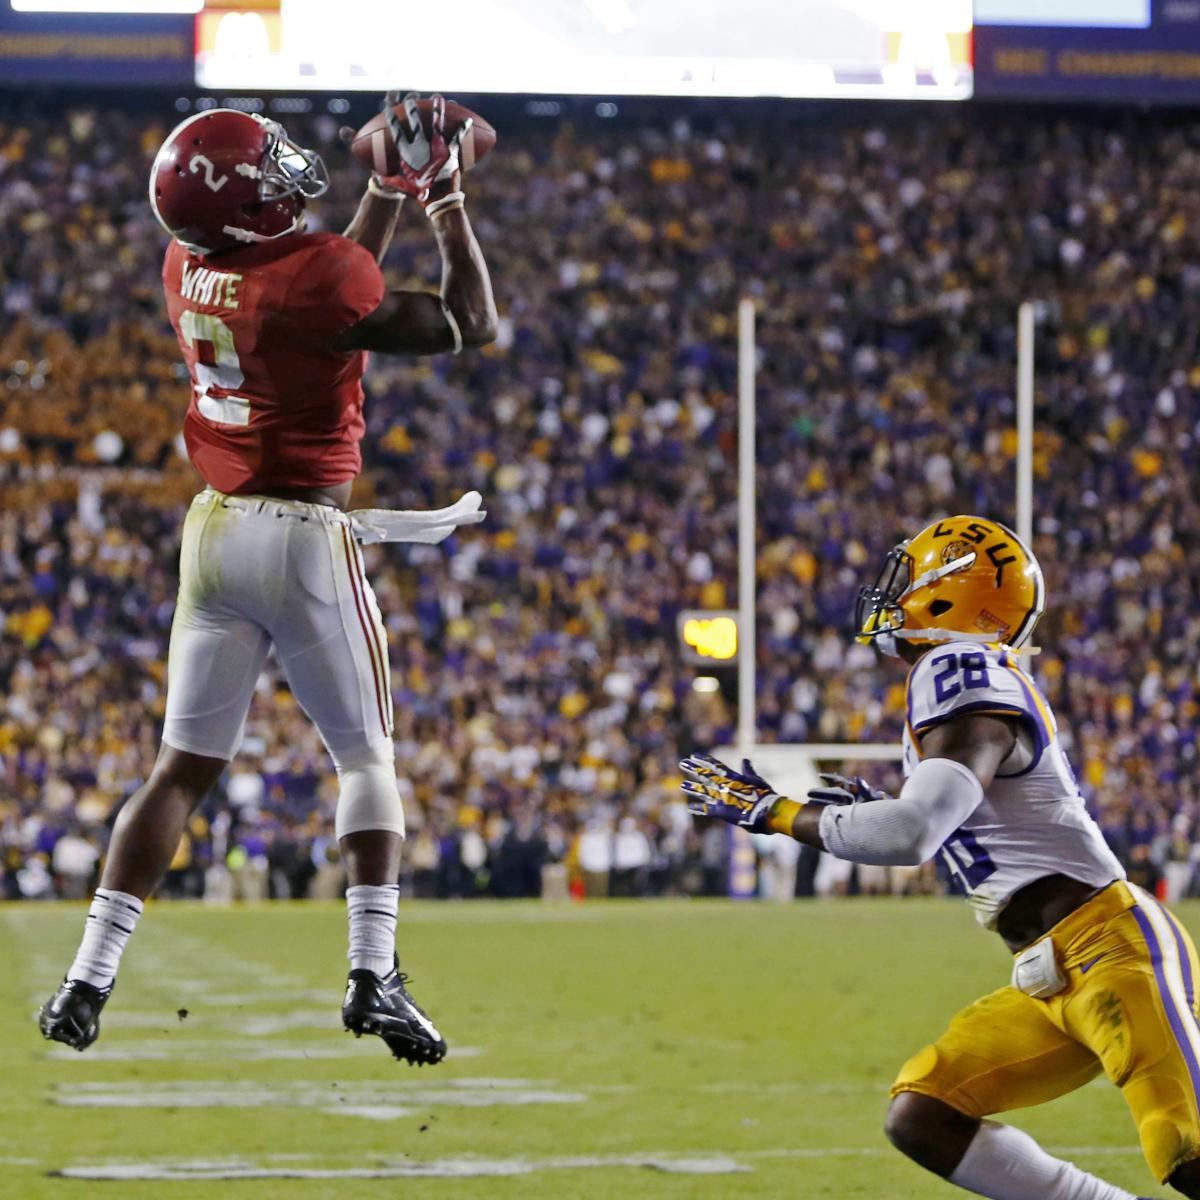 Alabama vs. LSU How Crimson Tide's Win Reshapes Playoff Picture